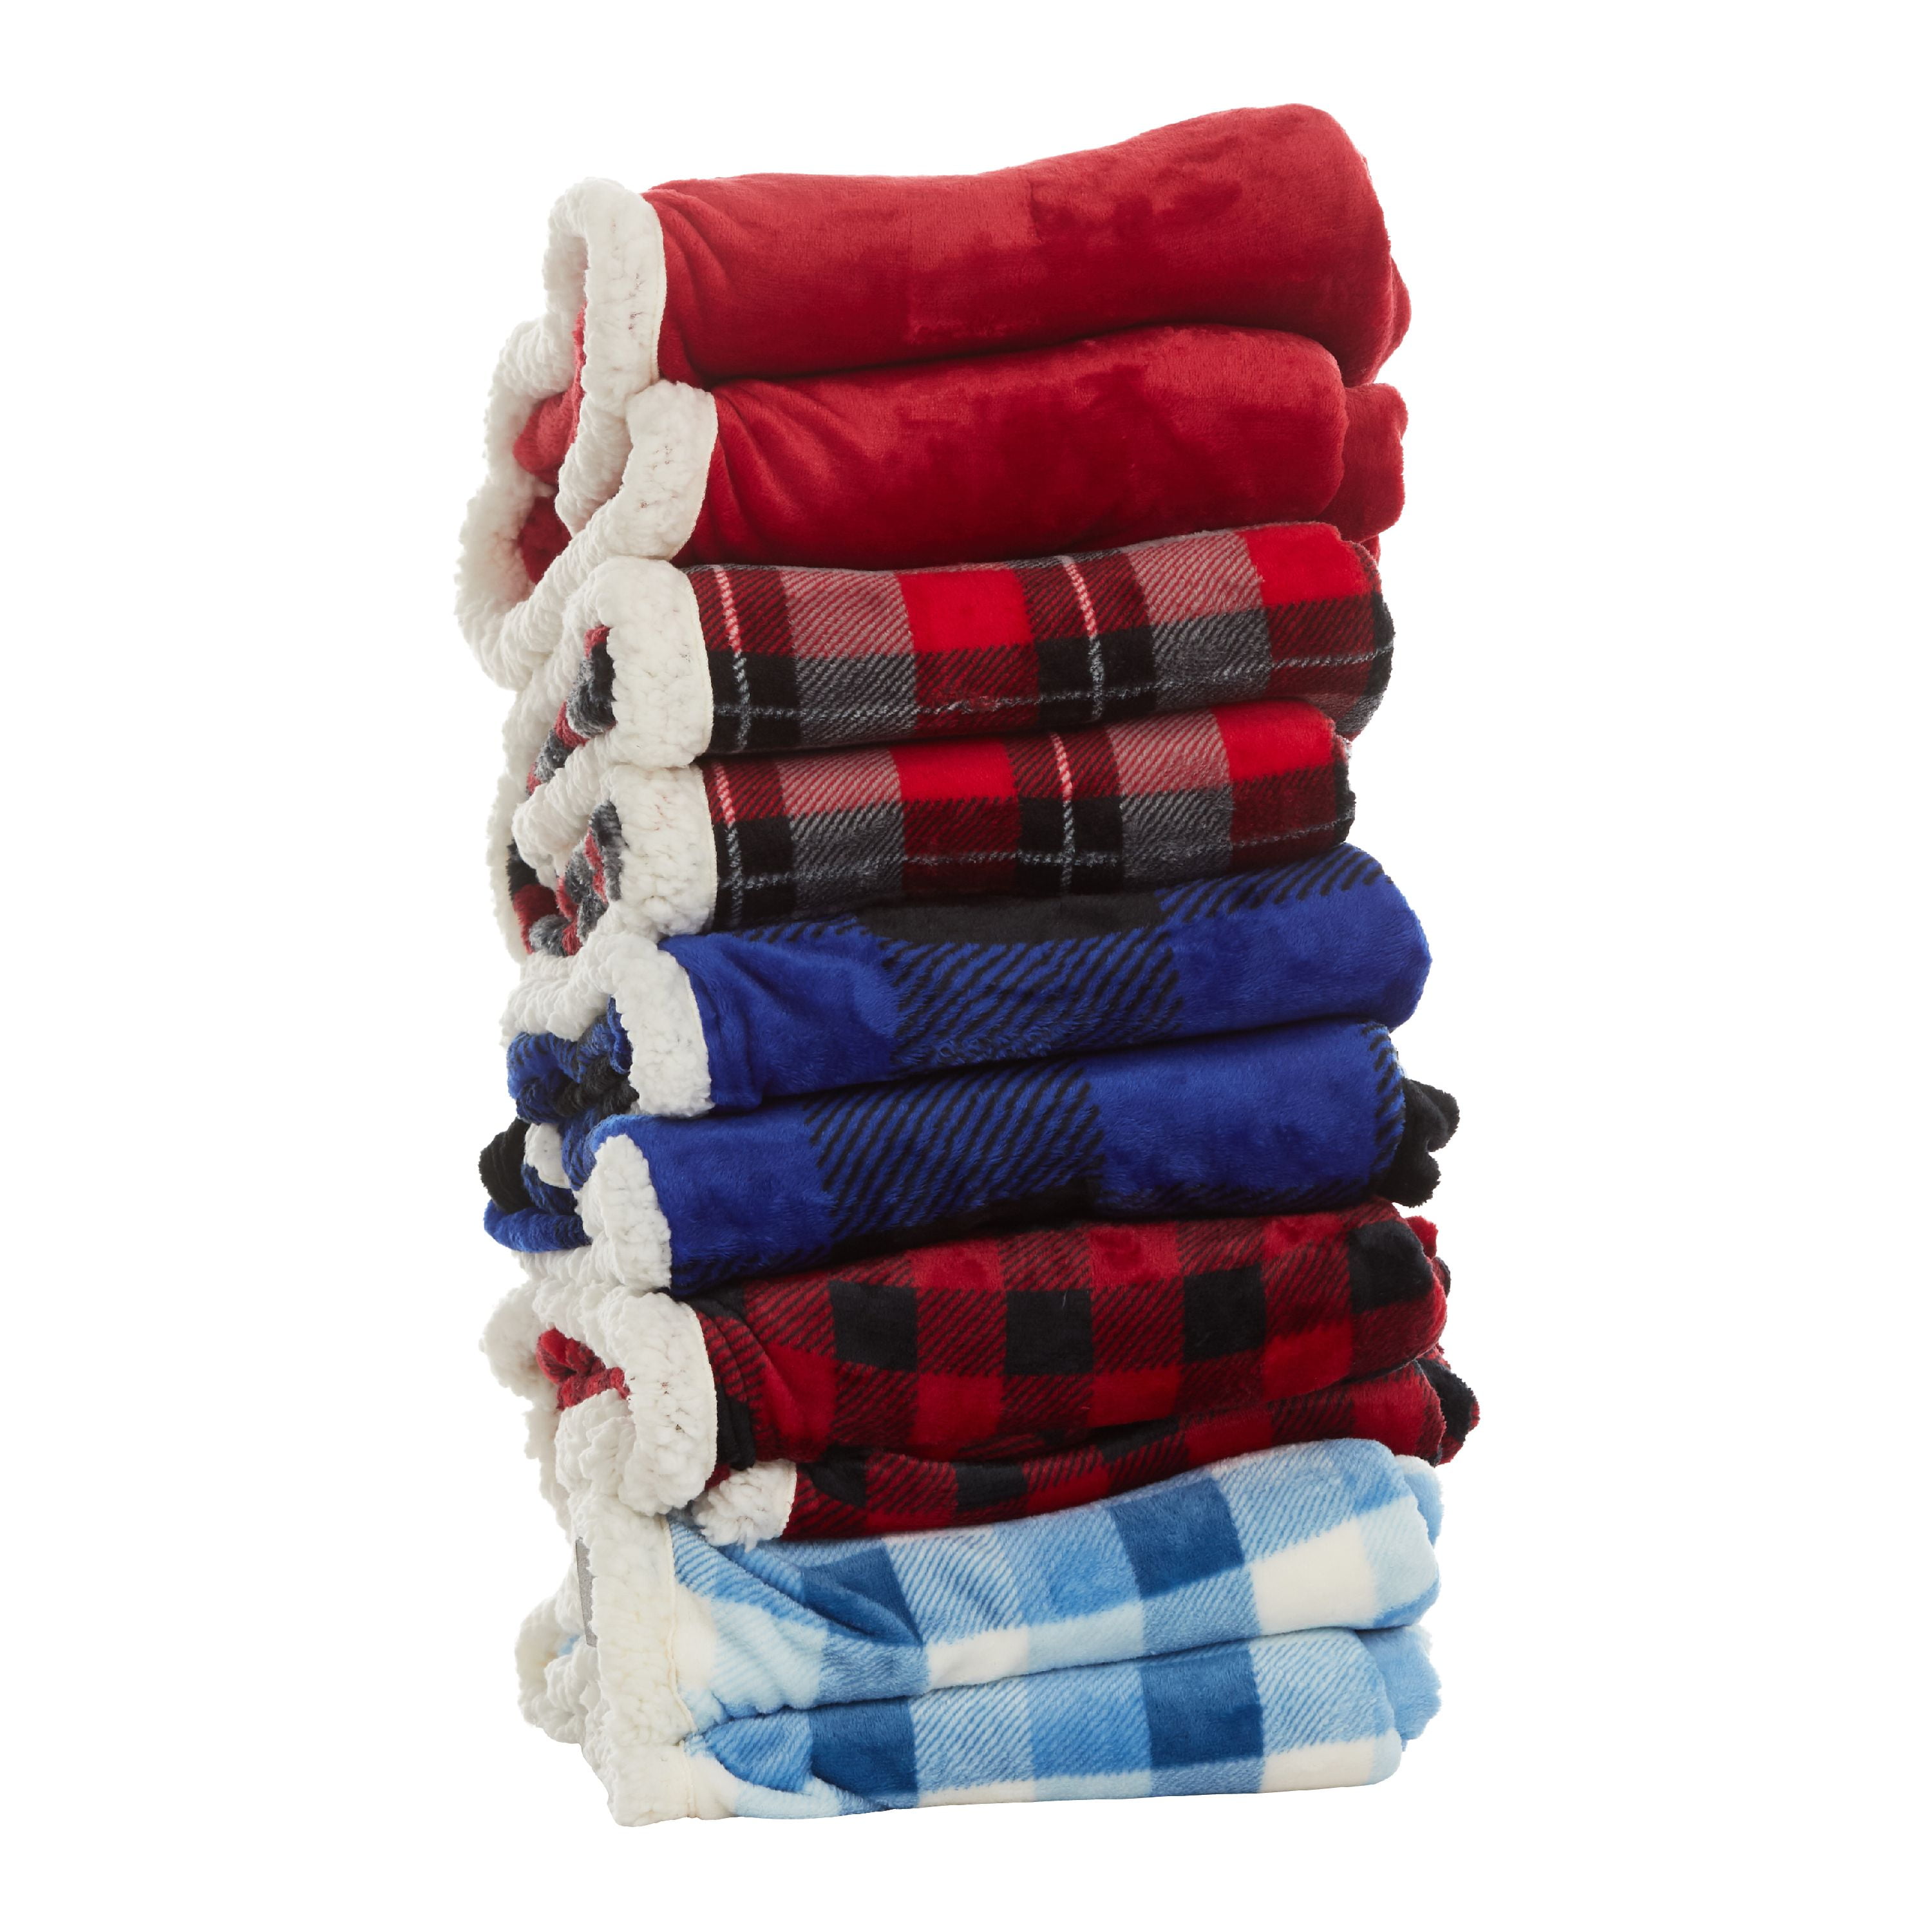 New Cuddl Duds 60x70” Red Plaid Cozy Soft Sherpa Throw Footed Pocket Blanket 